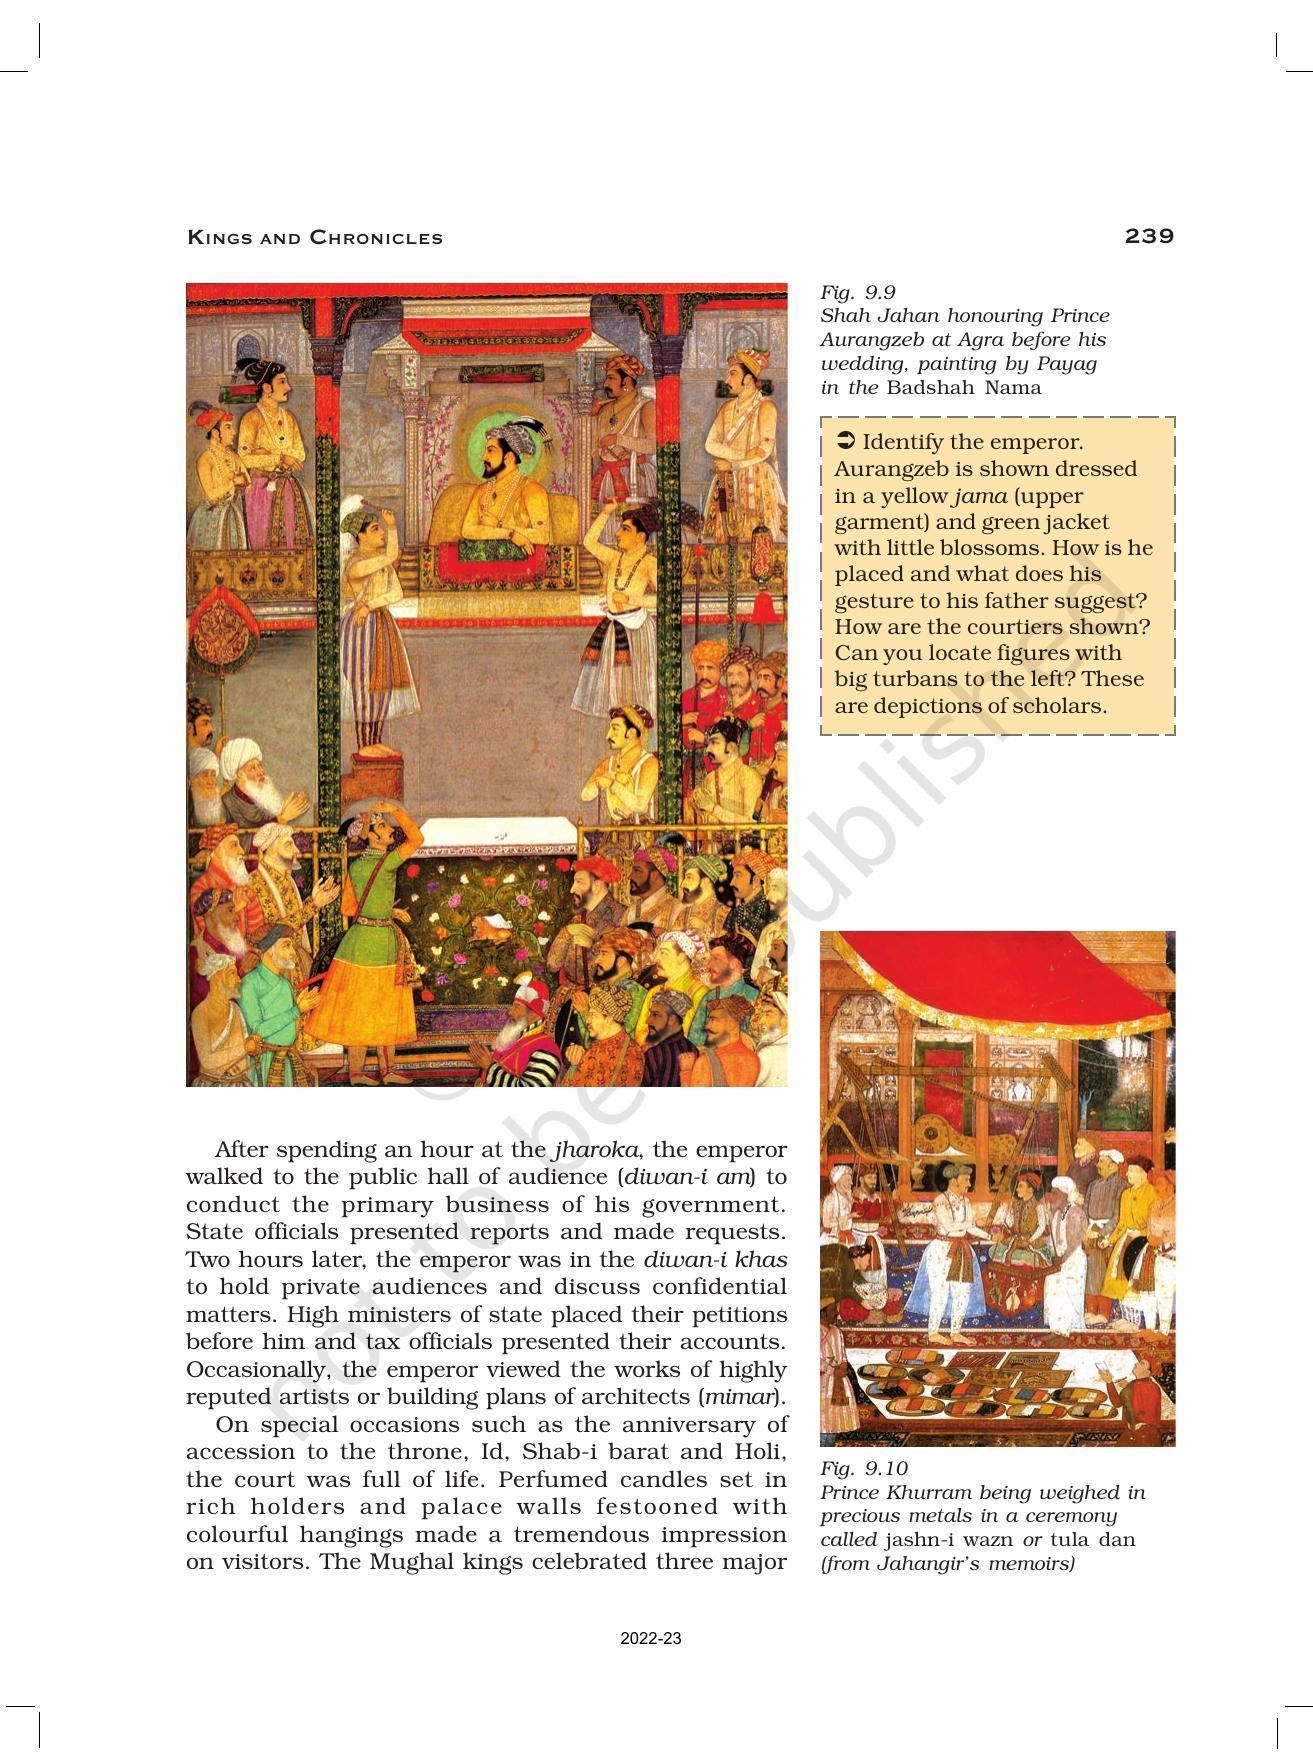 NCERT Book for Class 12 History (Part-II) Chapter 9 Kings and Chronicles - Page 16